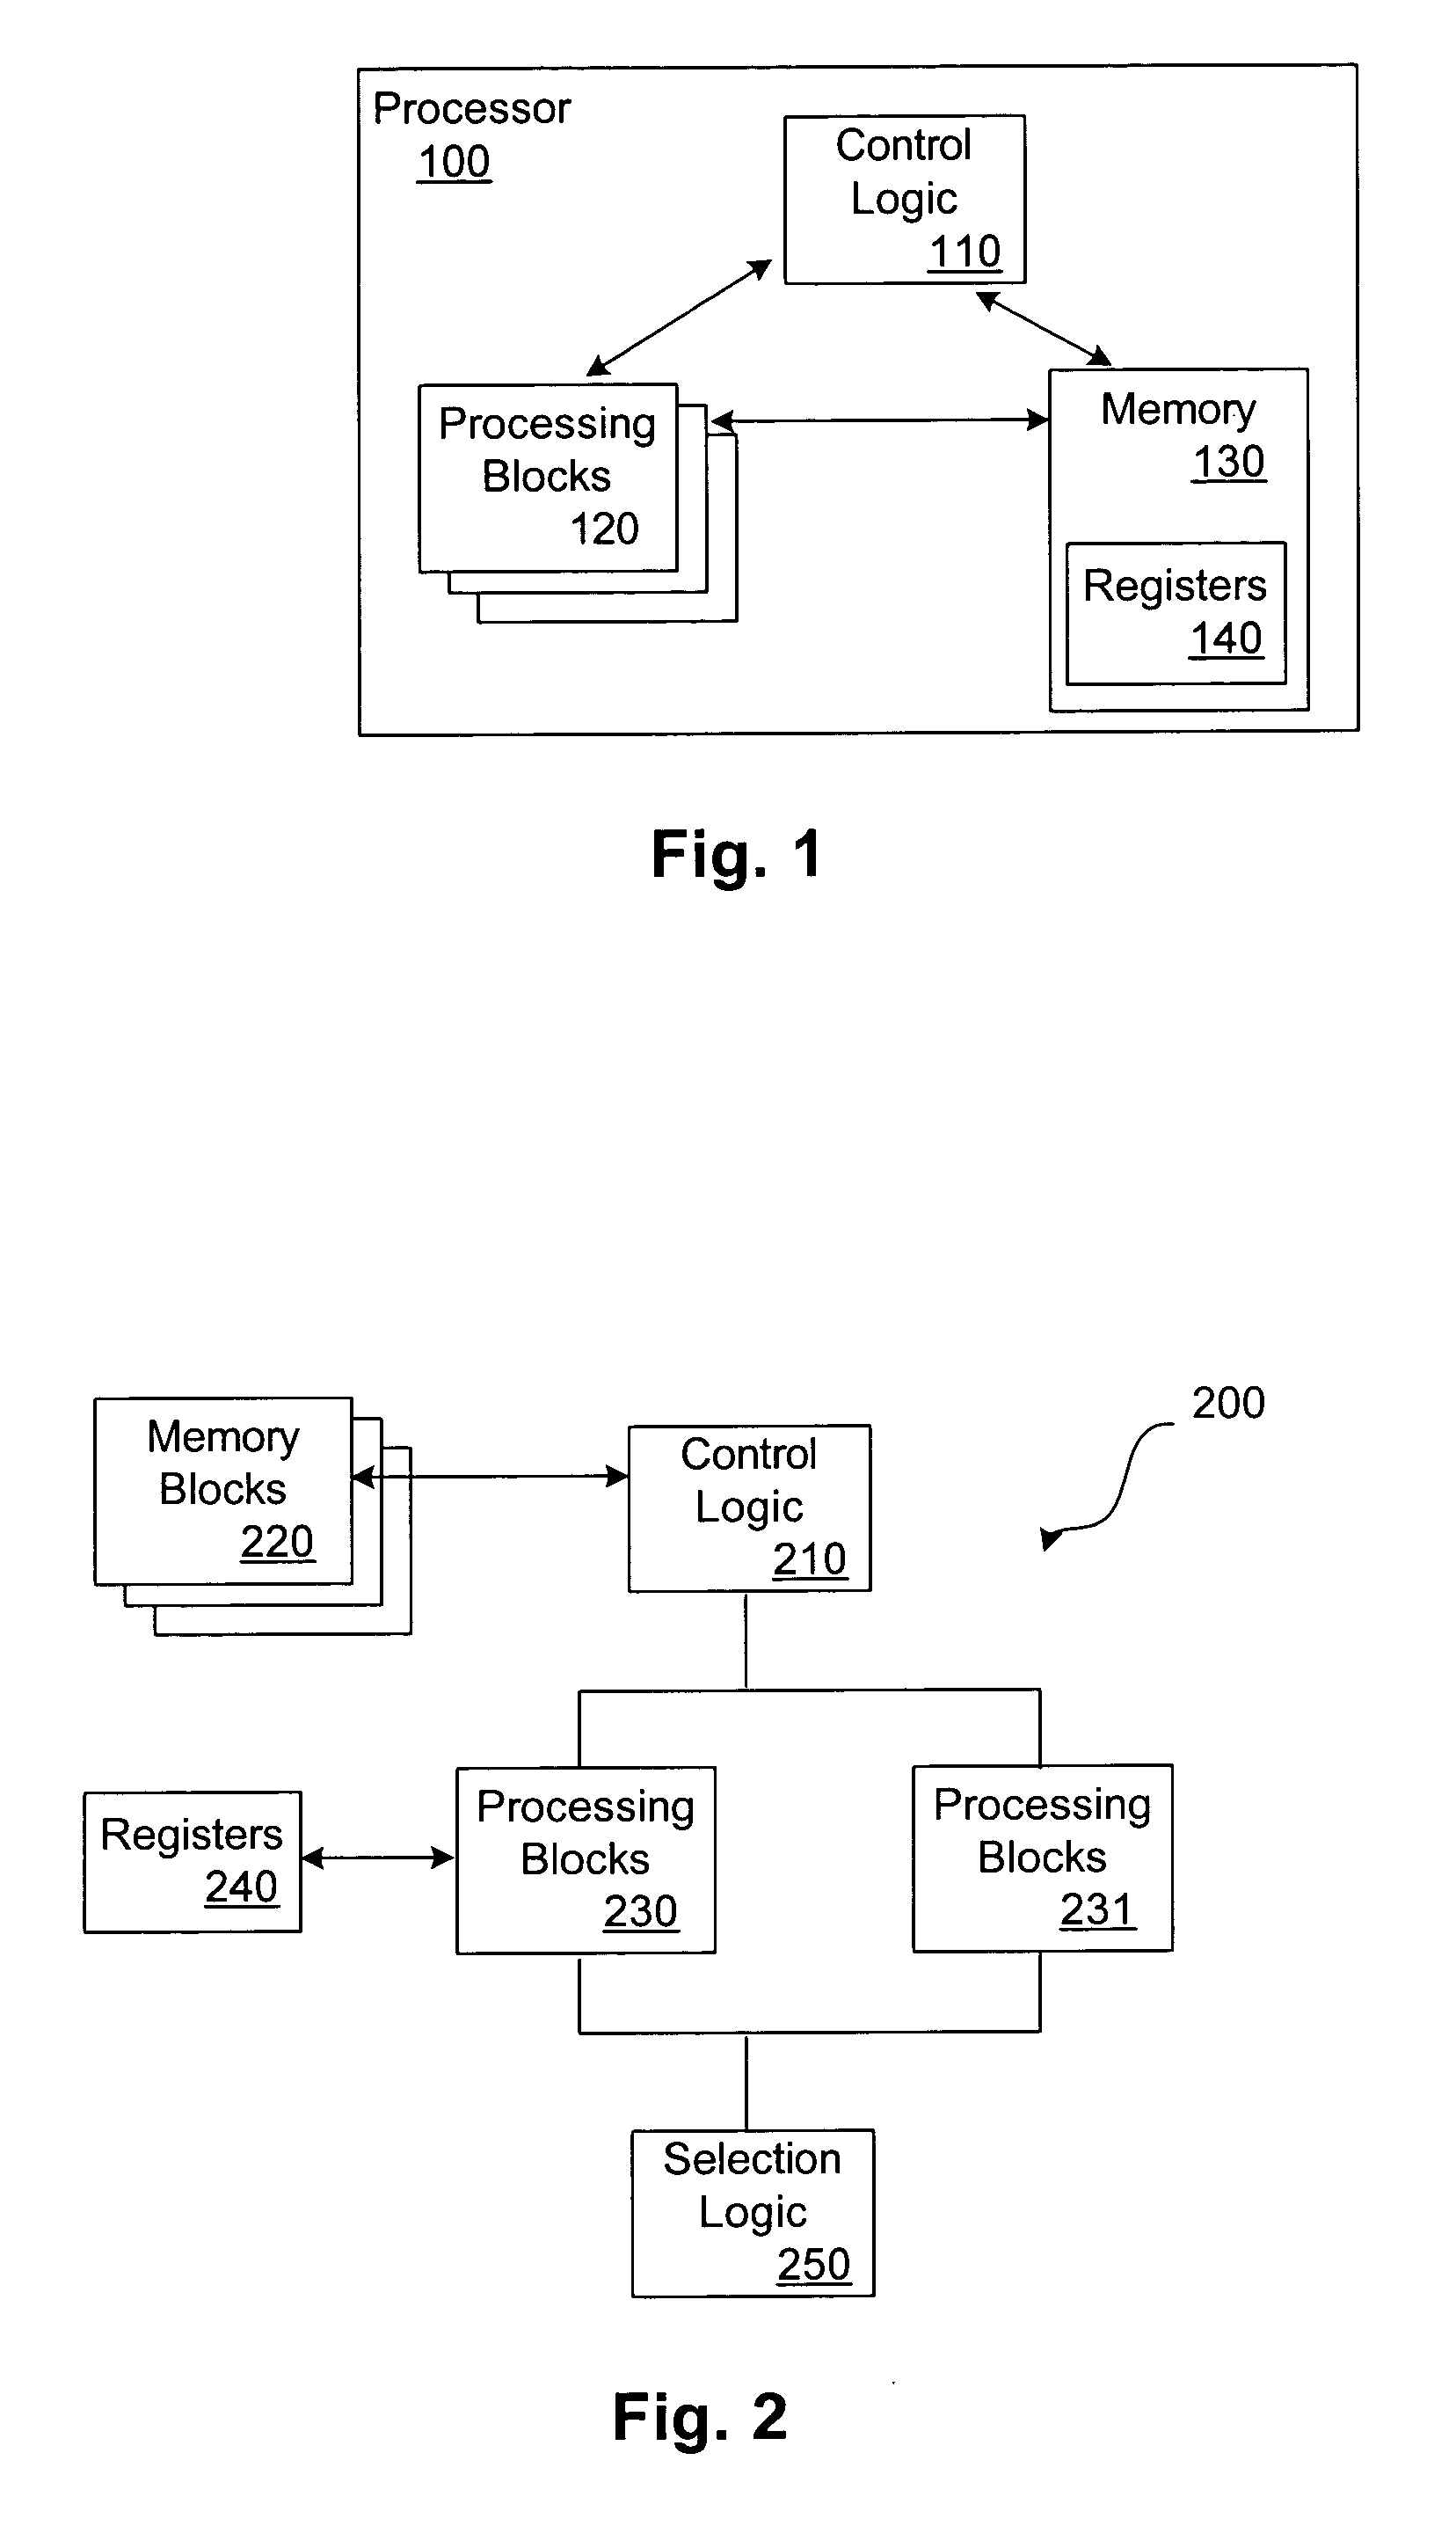 Method for reducing data dependency in codebook searches for multi-ALU DSP architectures